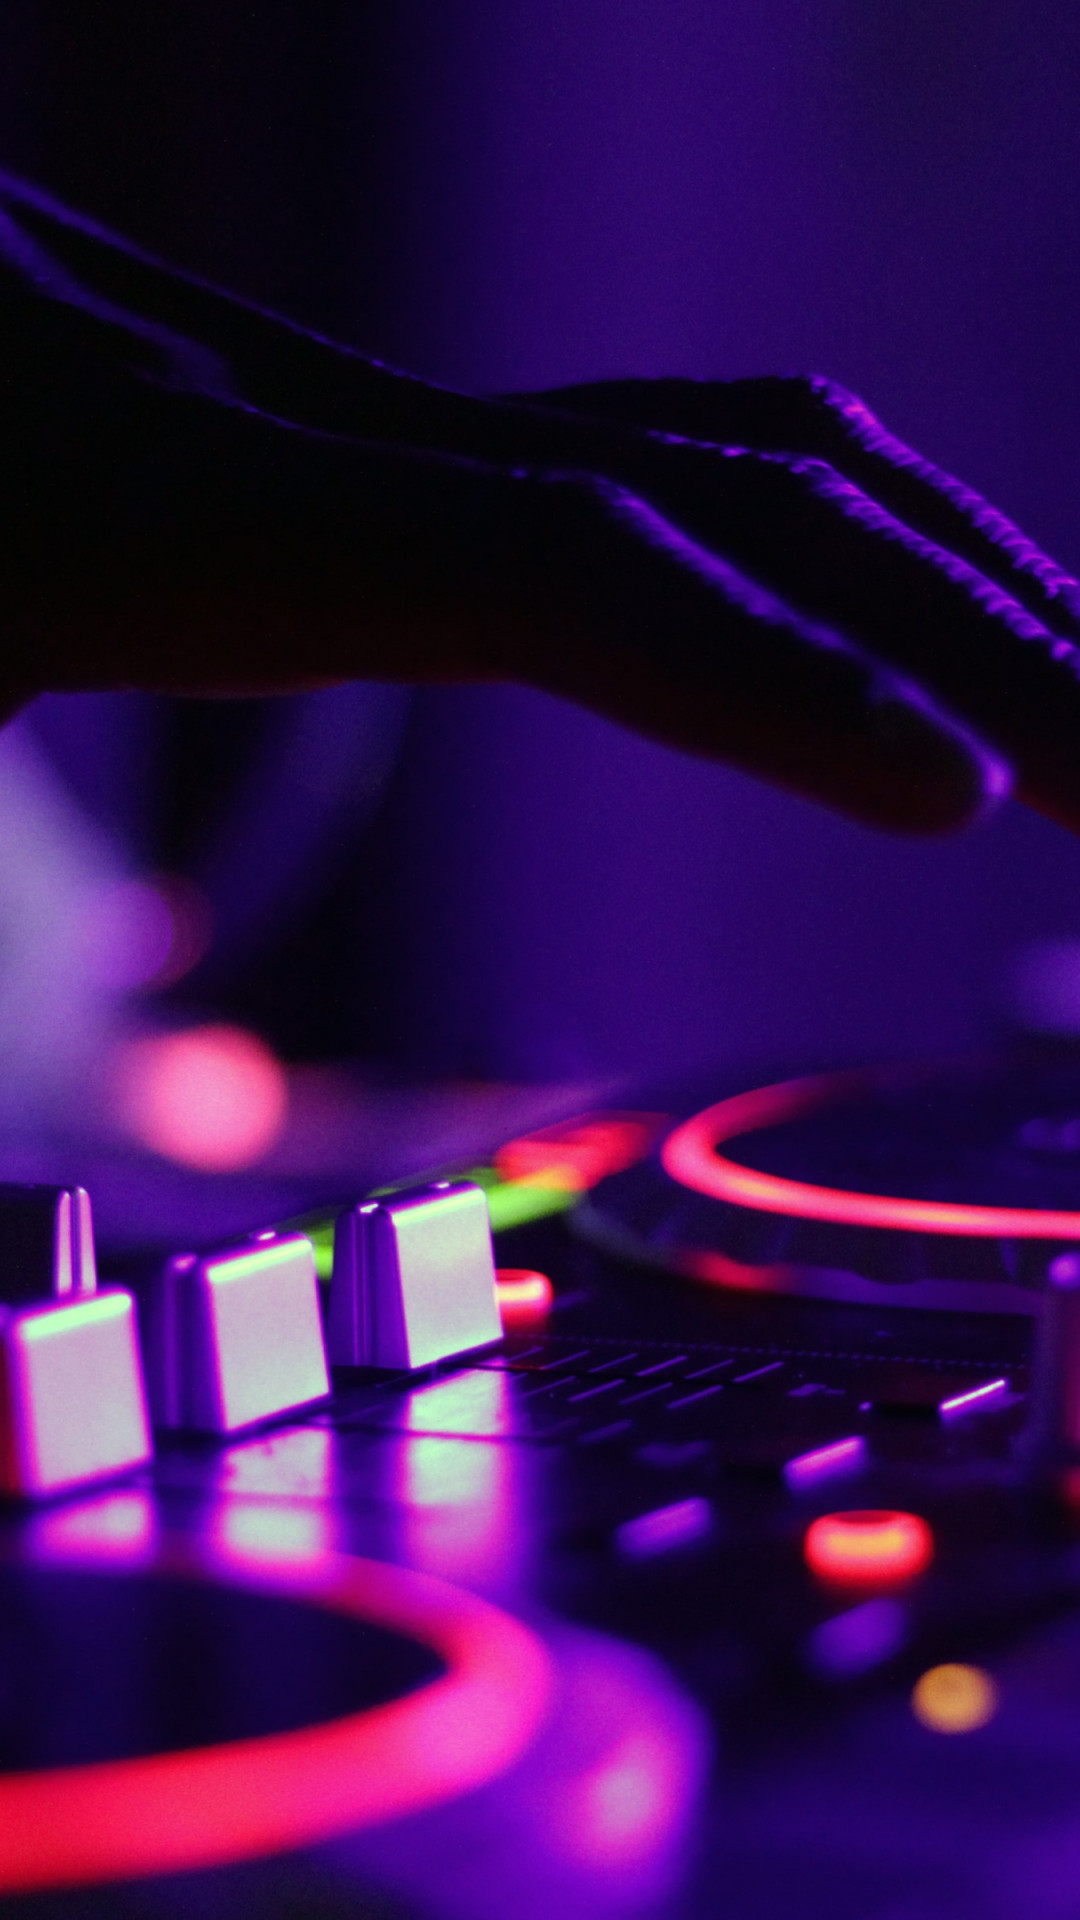 Dj Let The Music Play Wallpaper - Music Party - HD Wallpaper 